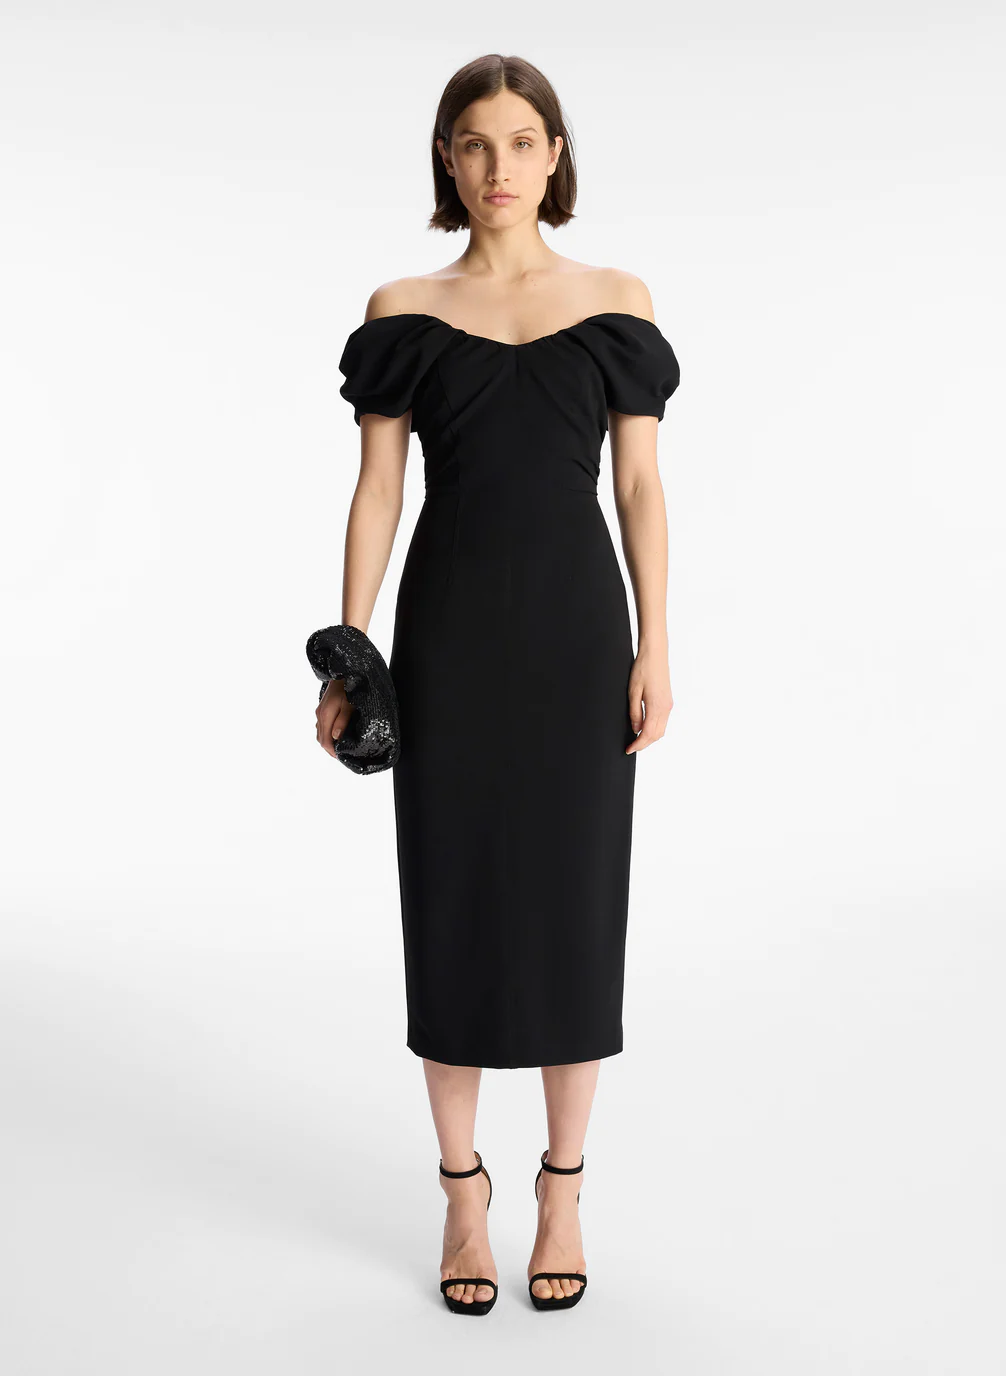 A.L.C Nora Dress in Black available at The New Trend Australia.